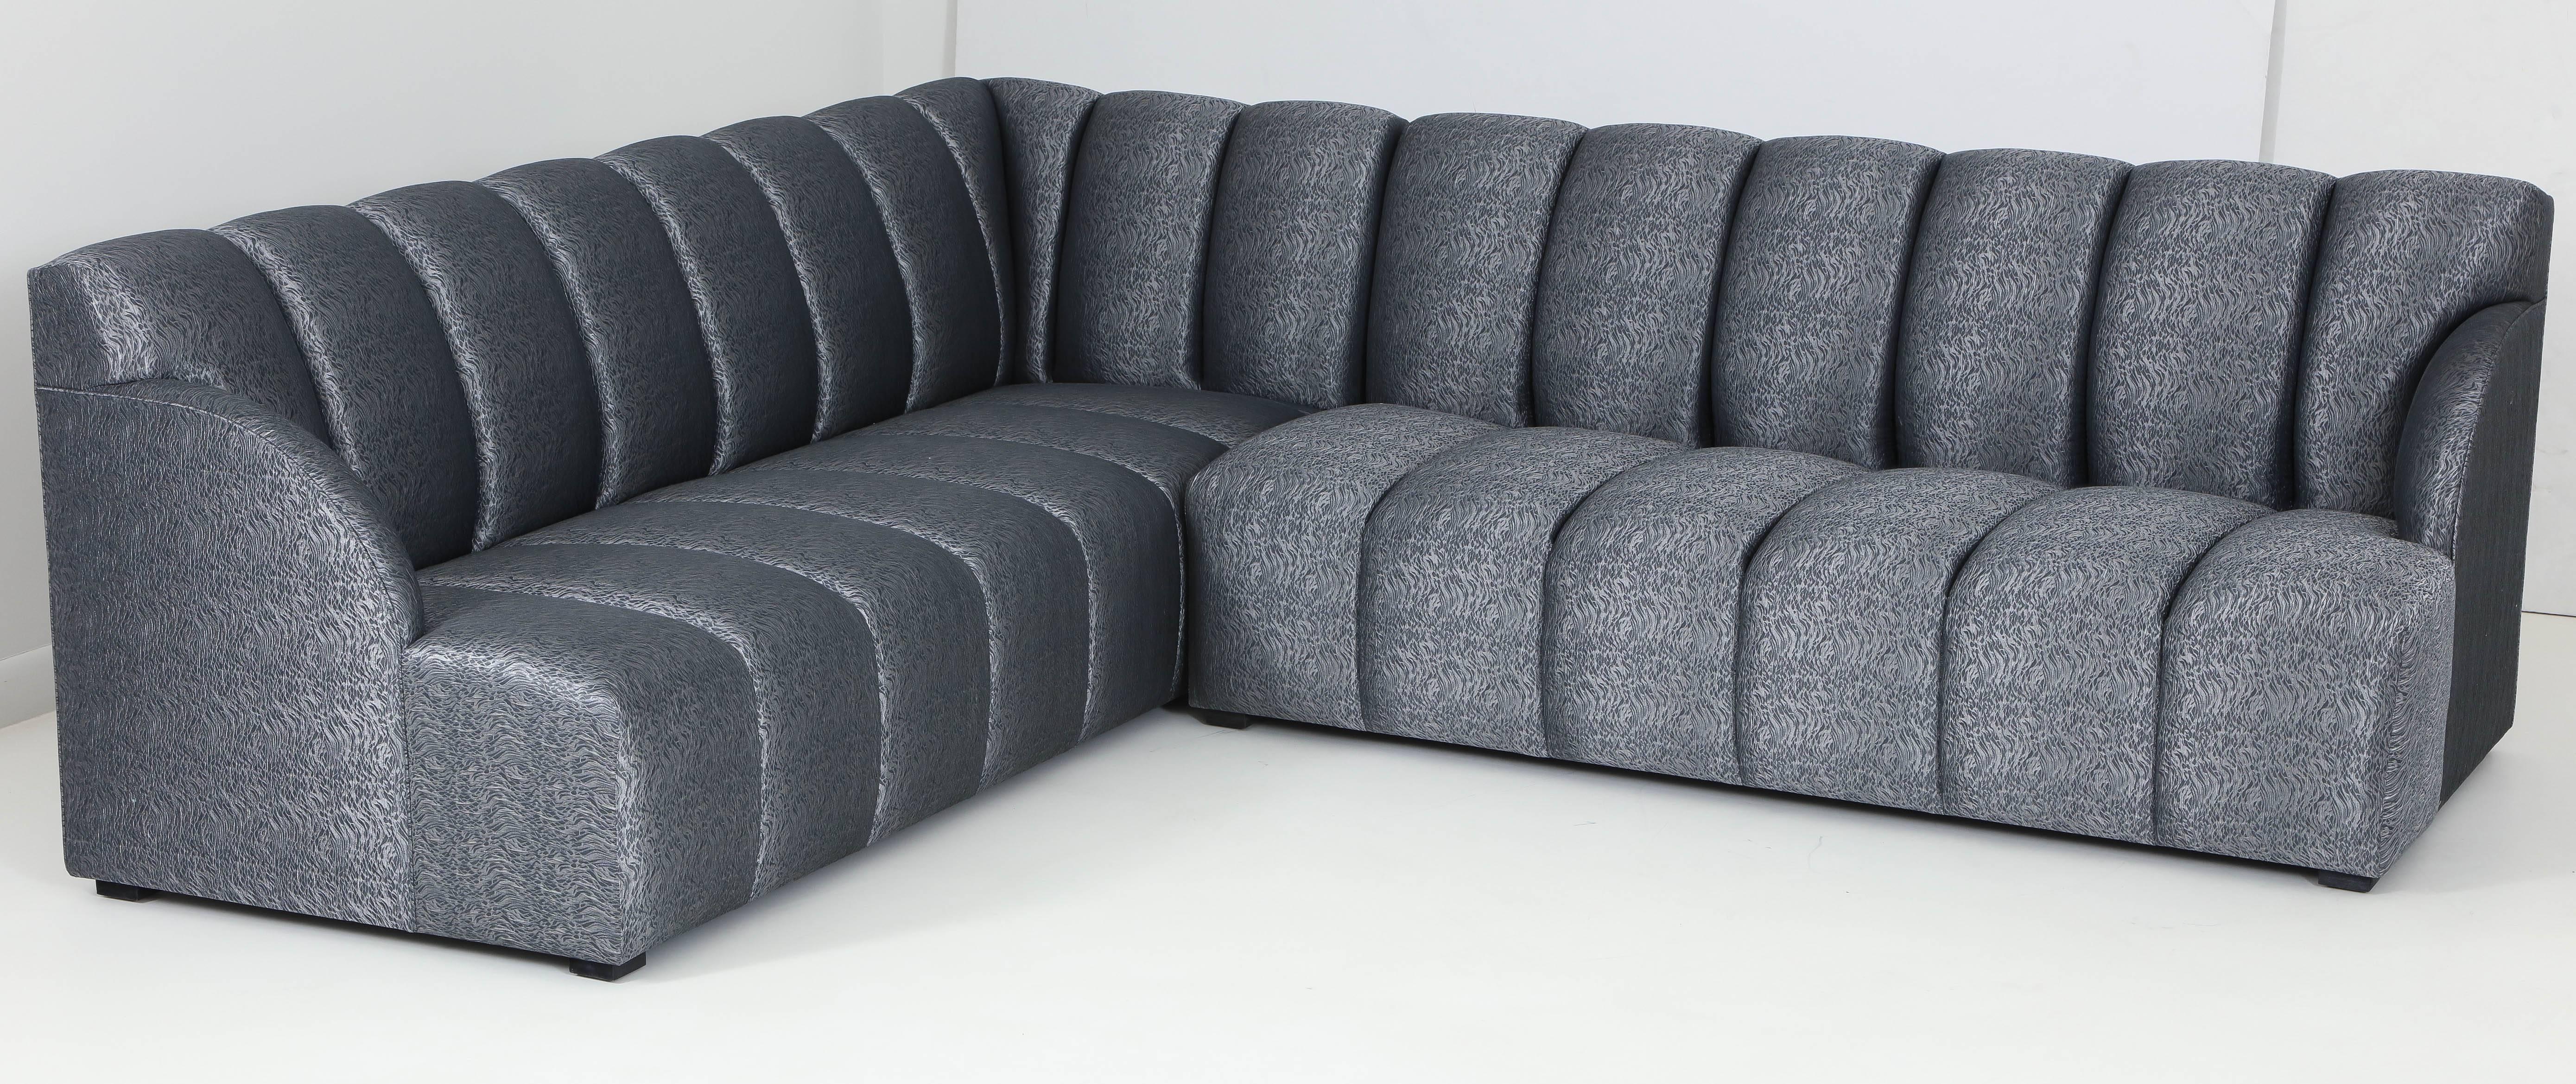 Modern channel tufted sectional sofa designed by iconic California designer Steve Chase. Sofa features new padding and upholstery from Romo which features grey/pewter metallic colors. Includes three pillows. 
Sofa measures 99